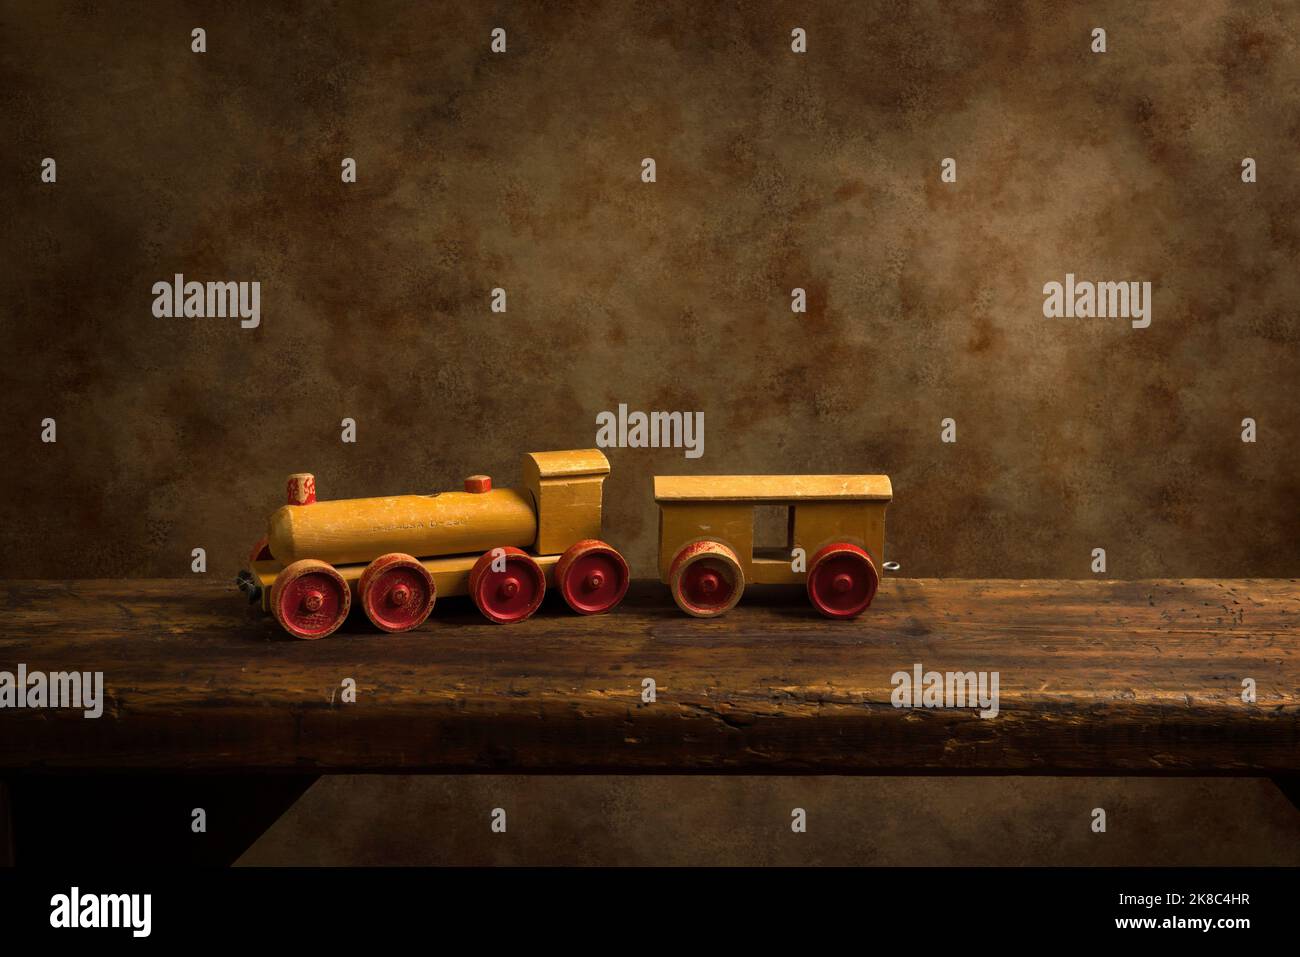 Cute old wooden train toy with red wheels on a rustic old wooden shelf. Stock Photo